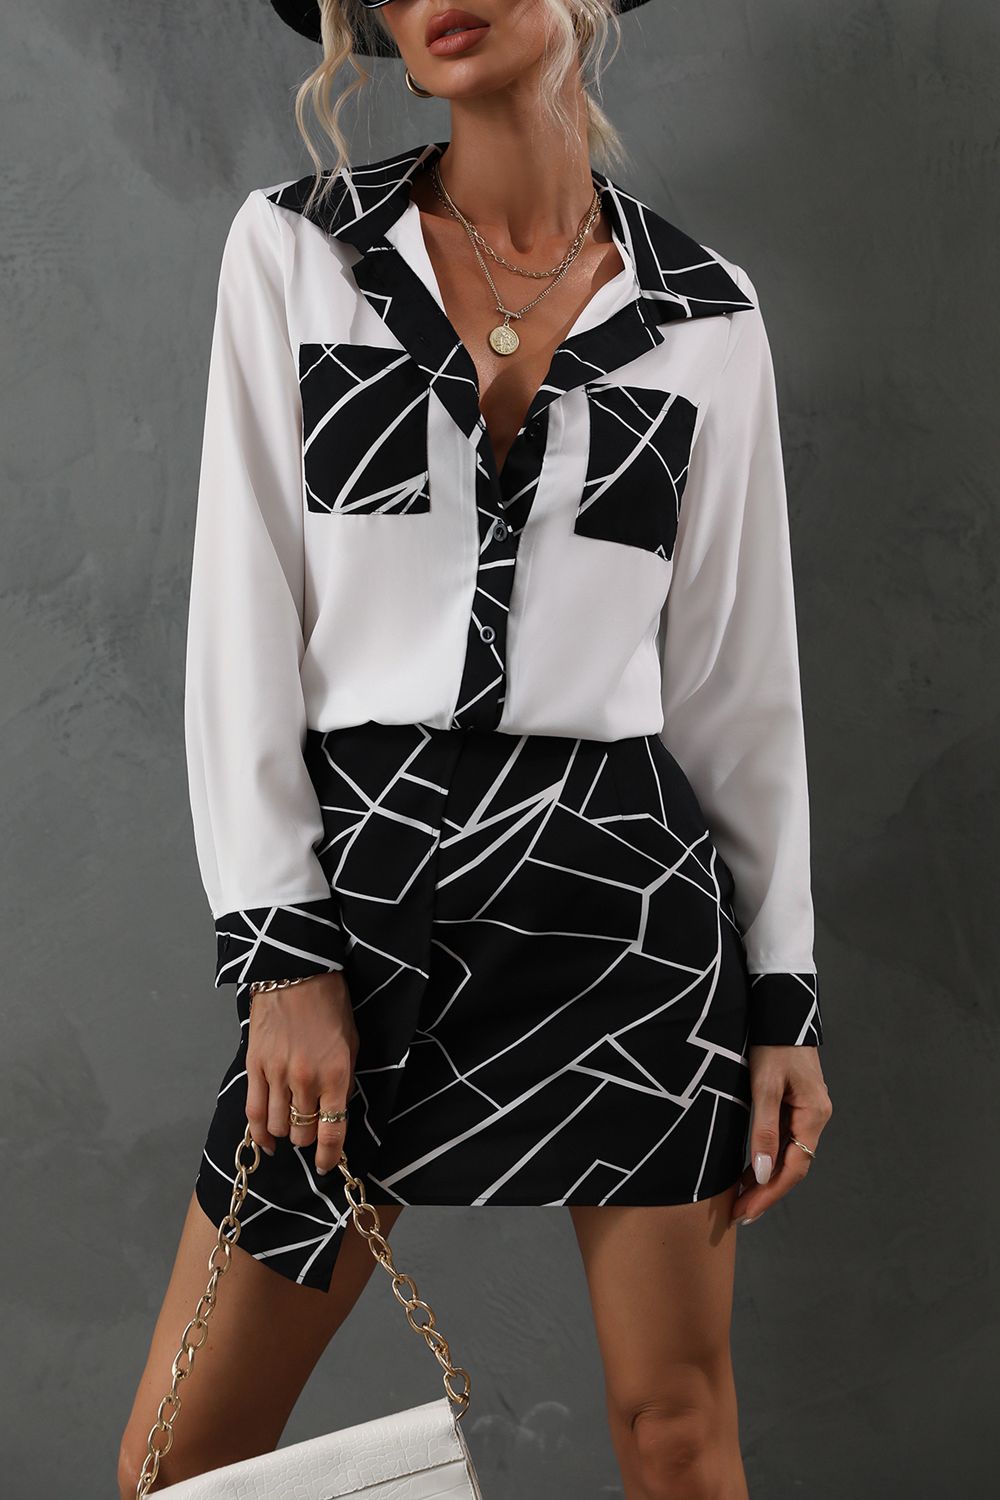 Chic Le Freak Print Collared Long Sleeve Blouse